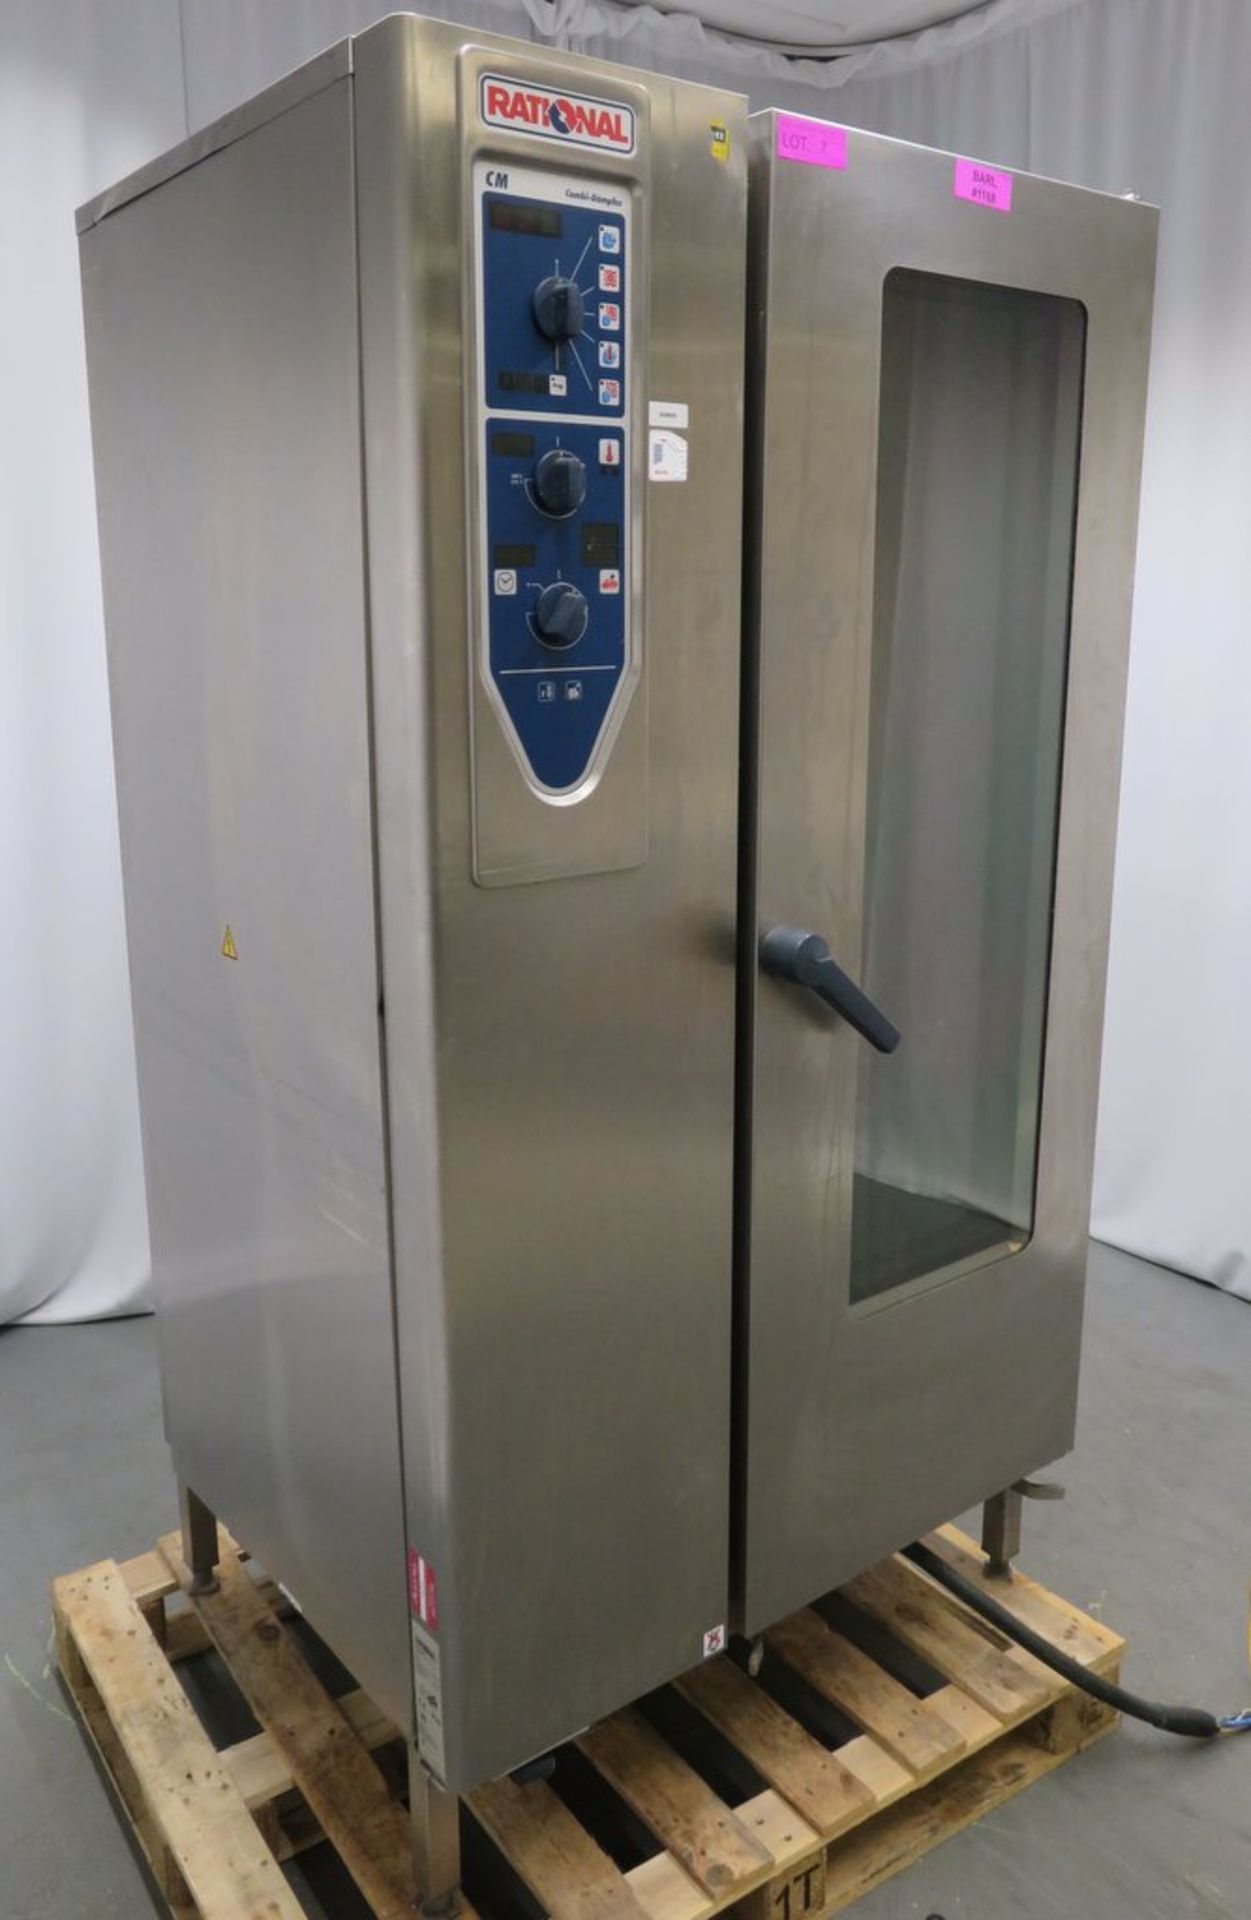 Rational CM 201 Combi-Dampfer 20 grid combi oven, 3 phase electric - Image 2 of 12